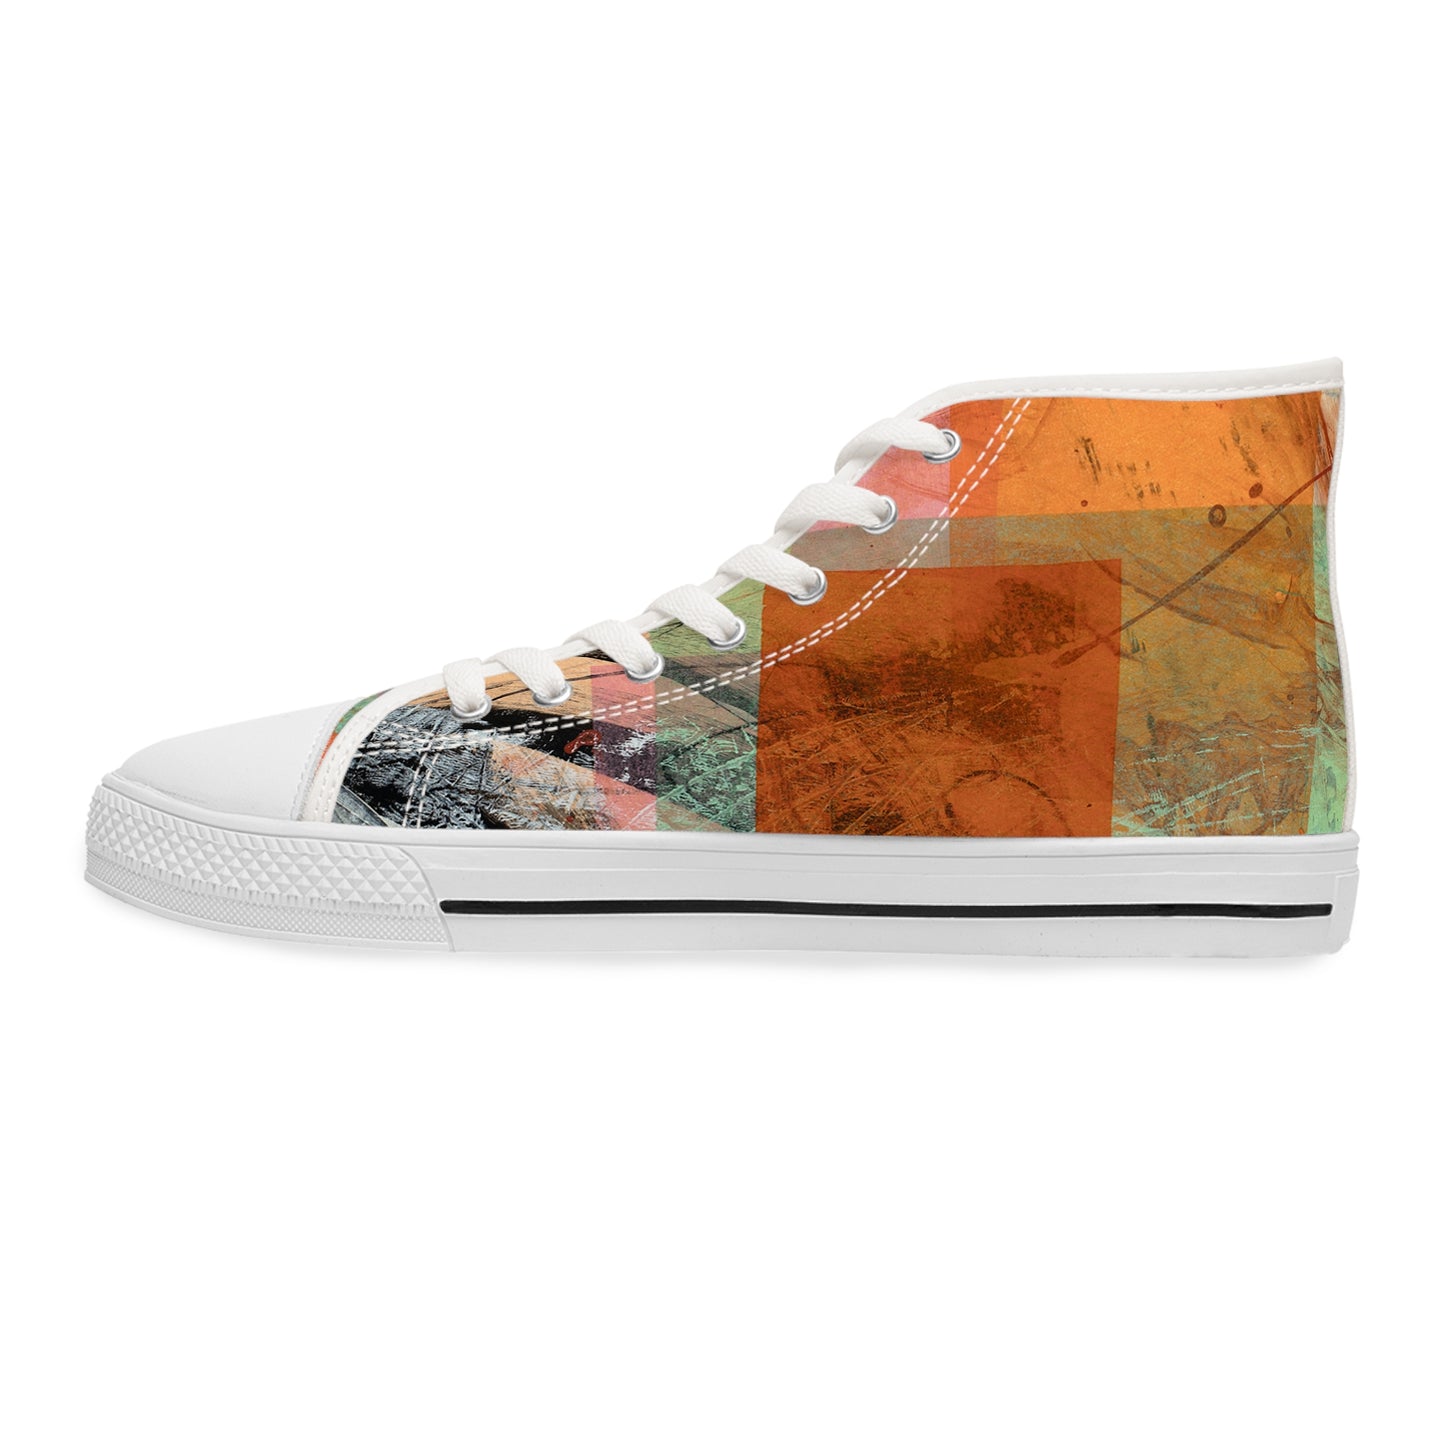 Women's High Top Sneakers - 02861 US 12 White sole